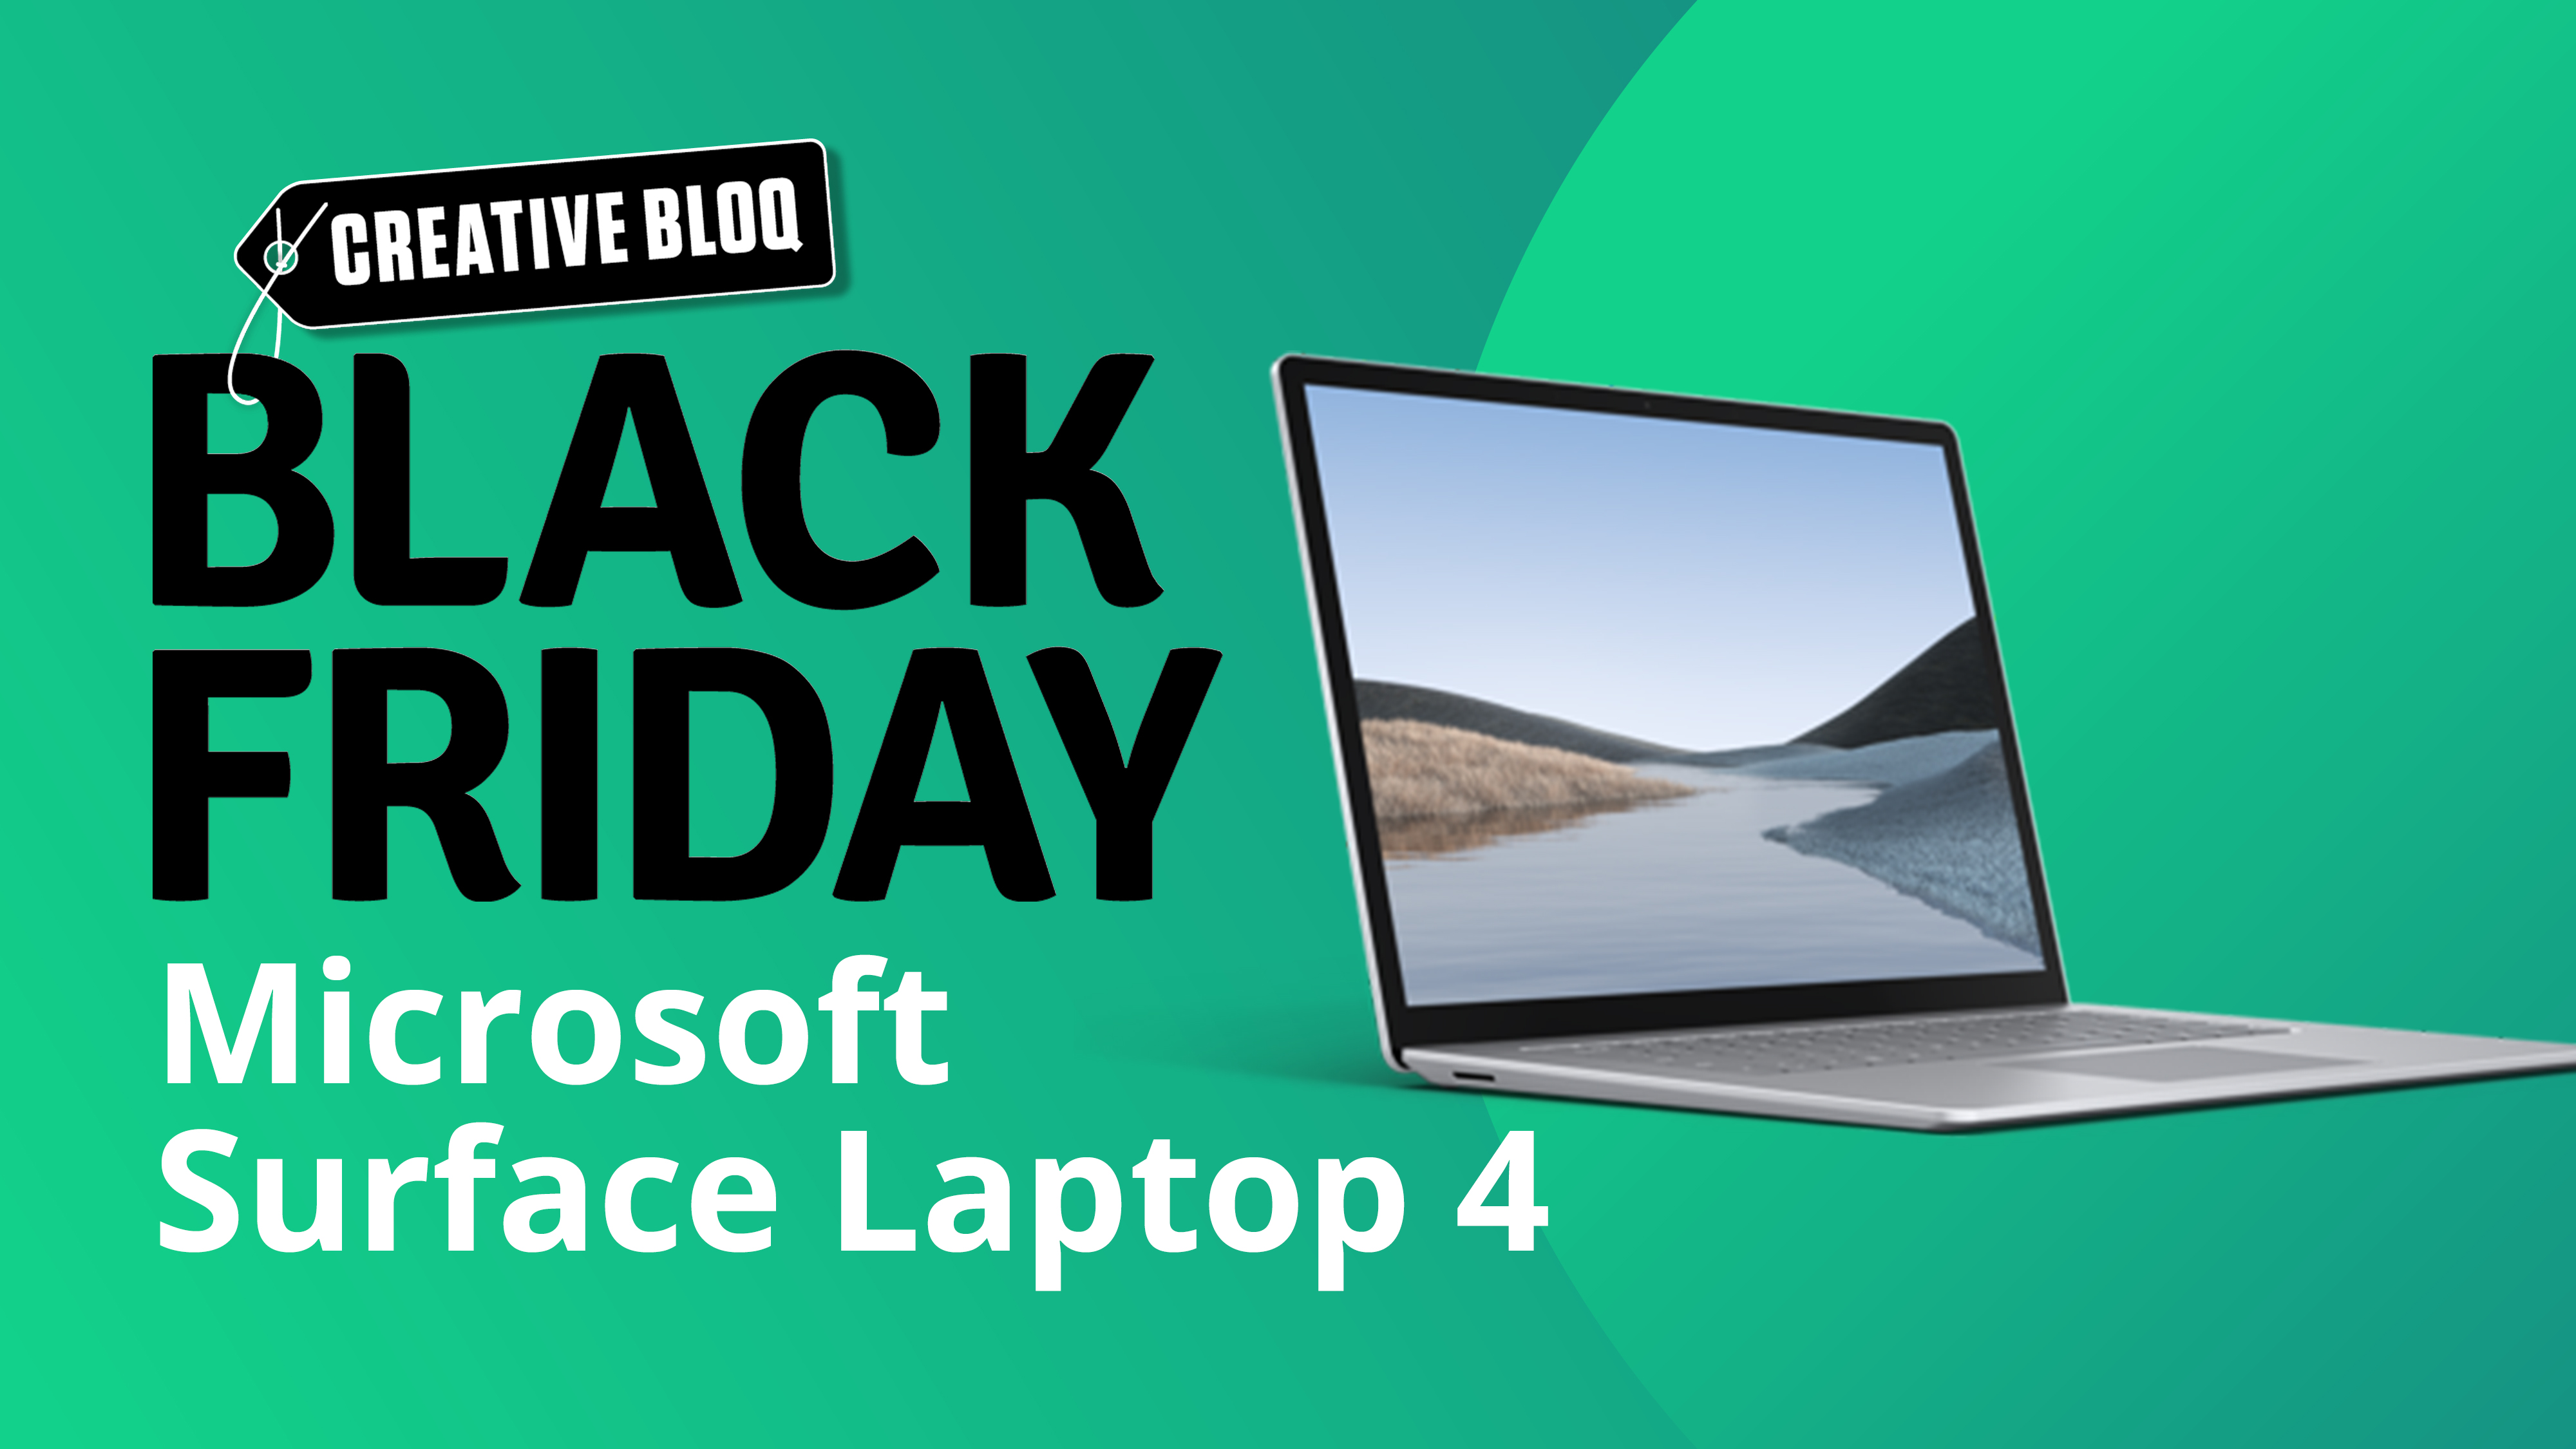 An image of the Microsoft Surface Black Friday deal, with a Microsoft Surface Laptop 4 against a green background